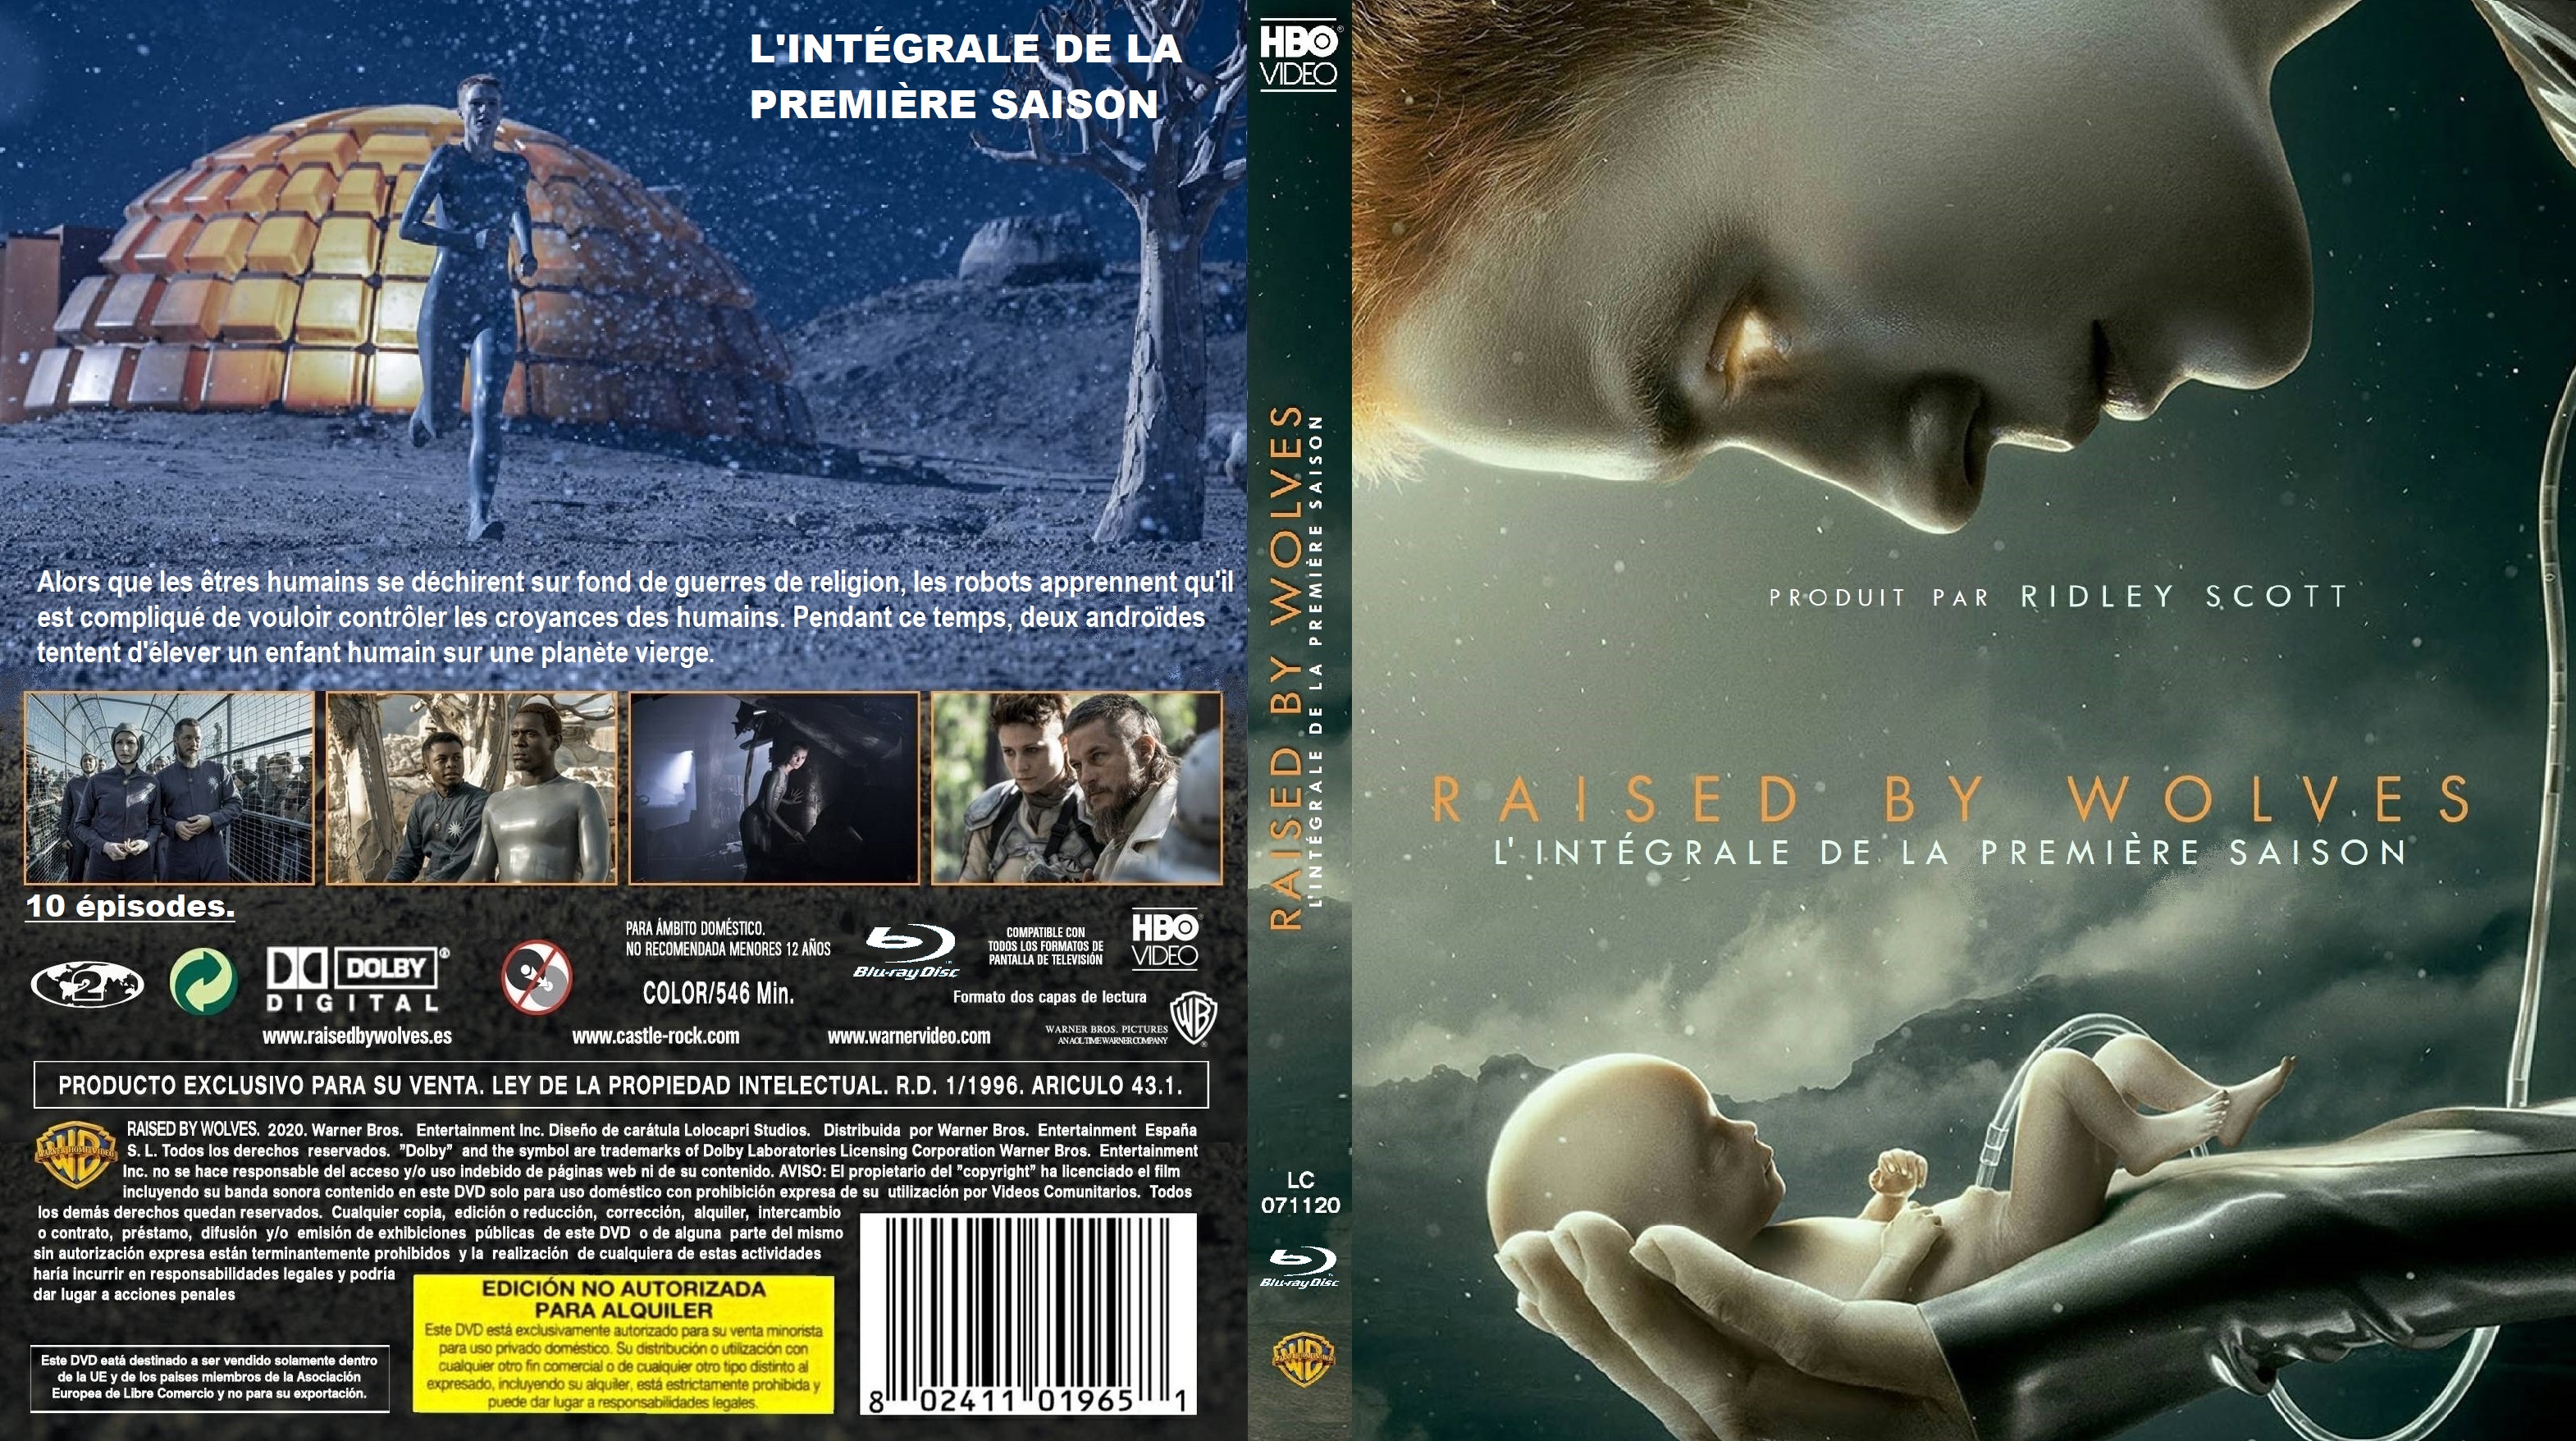 Jaquette DVD Raised by Wolves  saison 1 BLU RAY custom